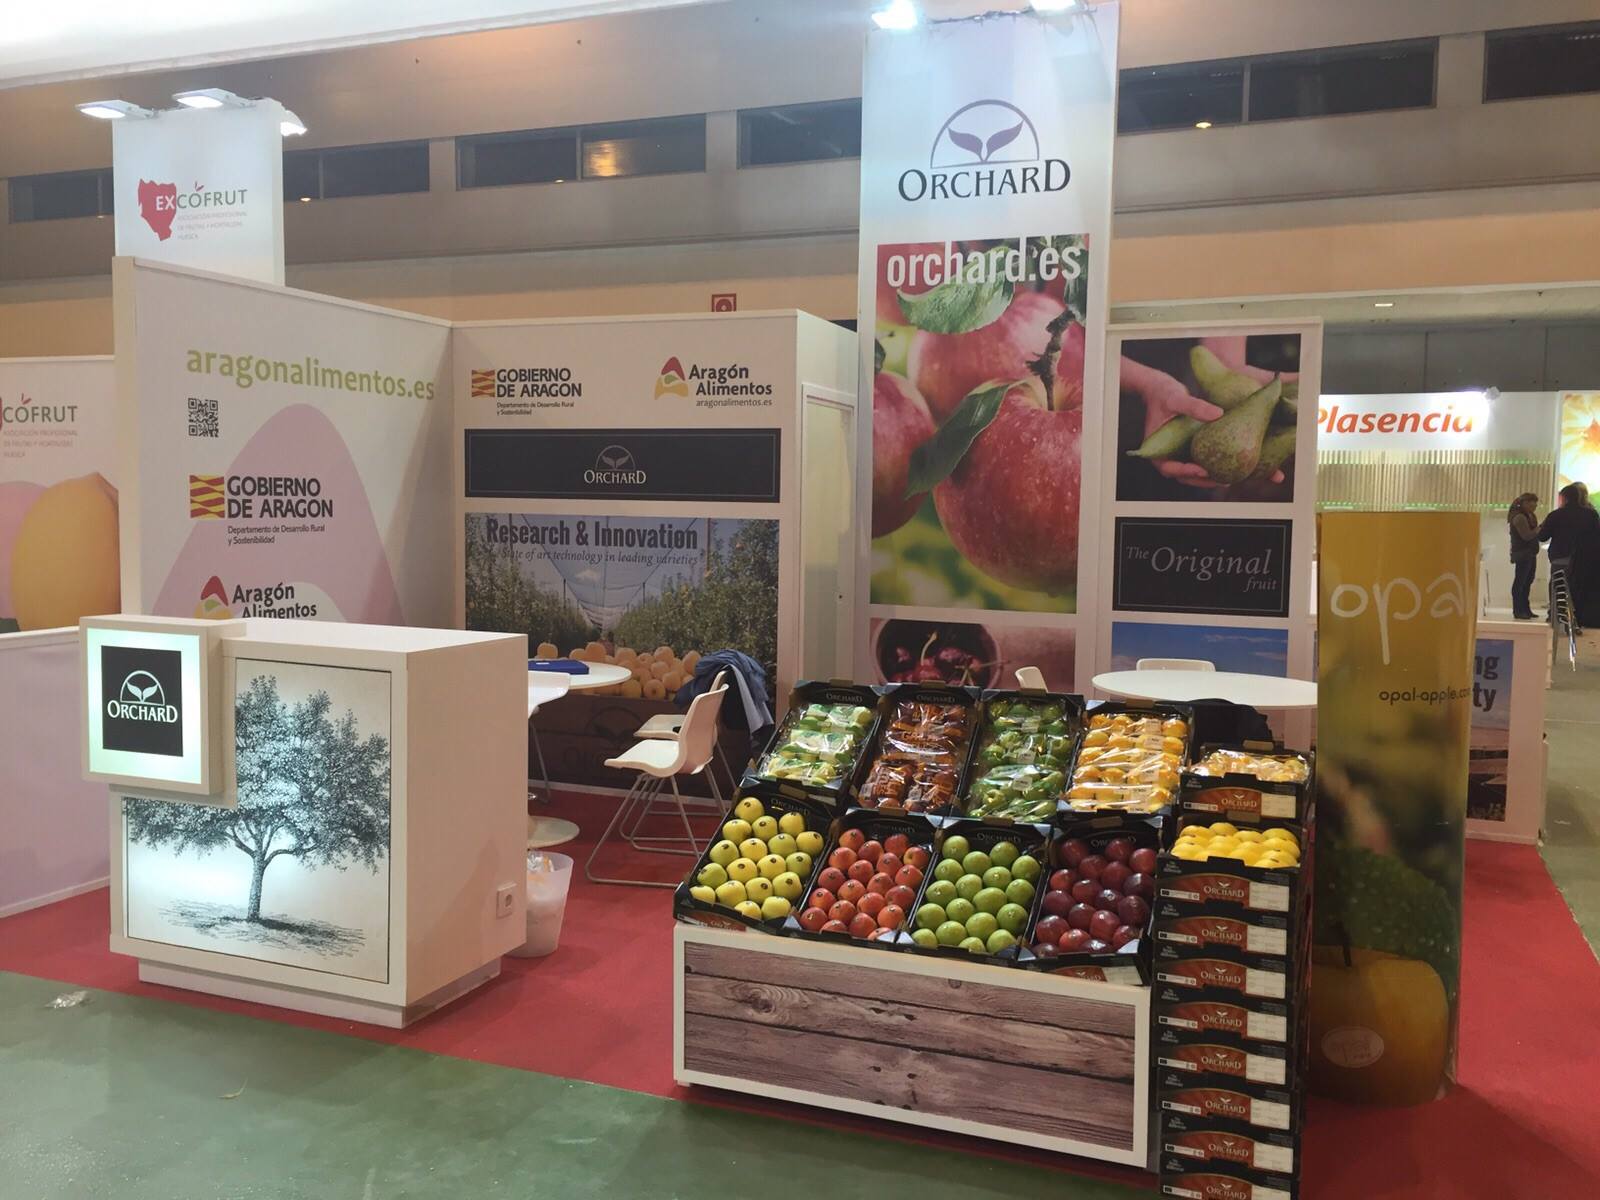 Orchard stand at Fruit Attraction fair | Orchard | La Fruta original